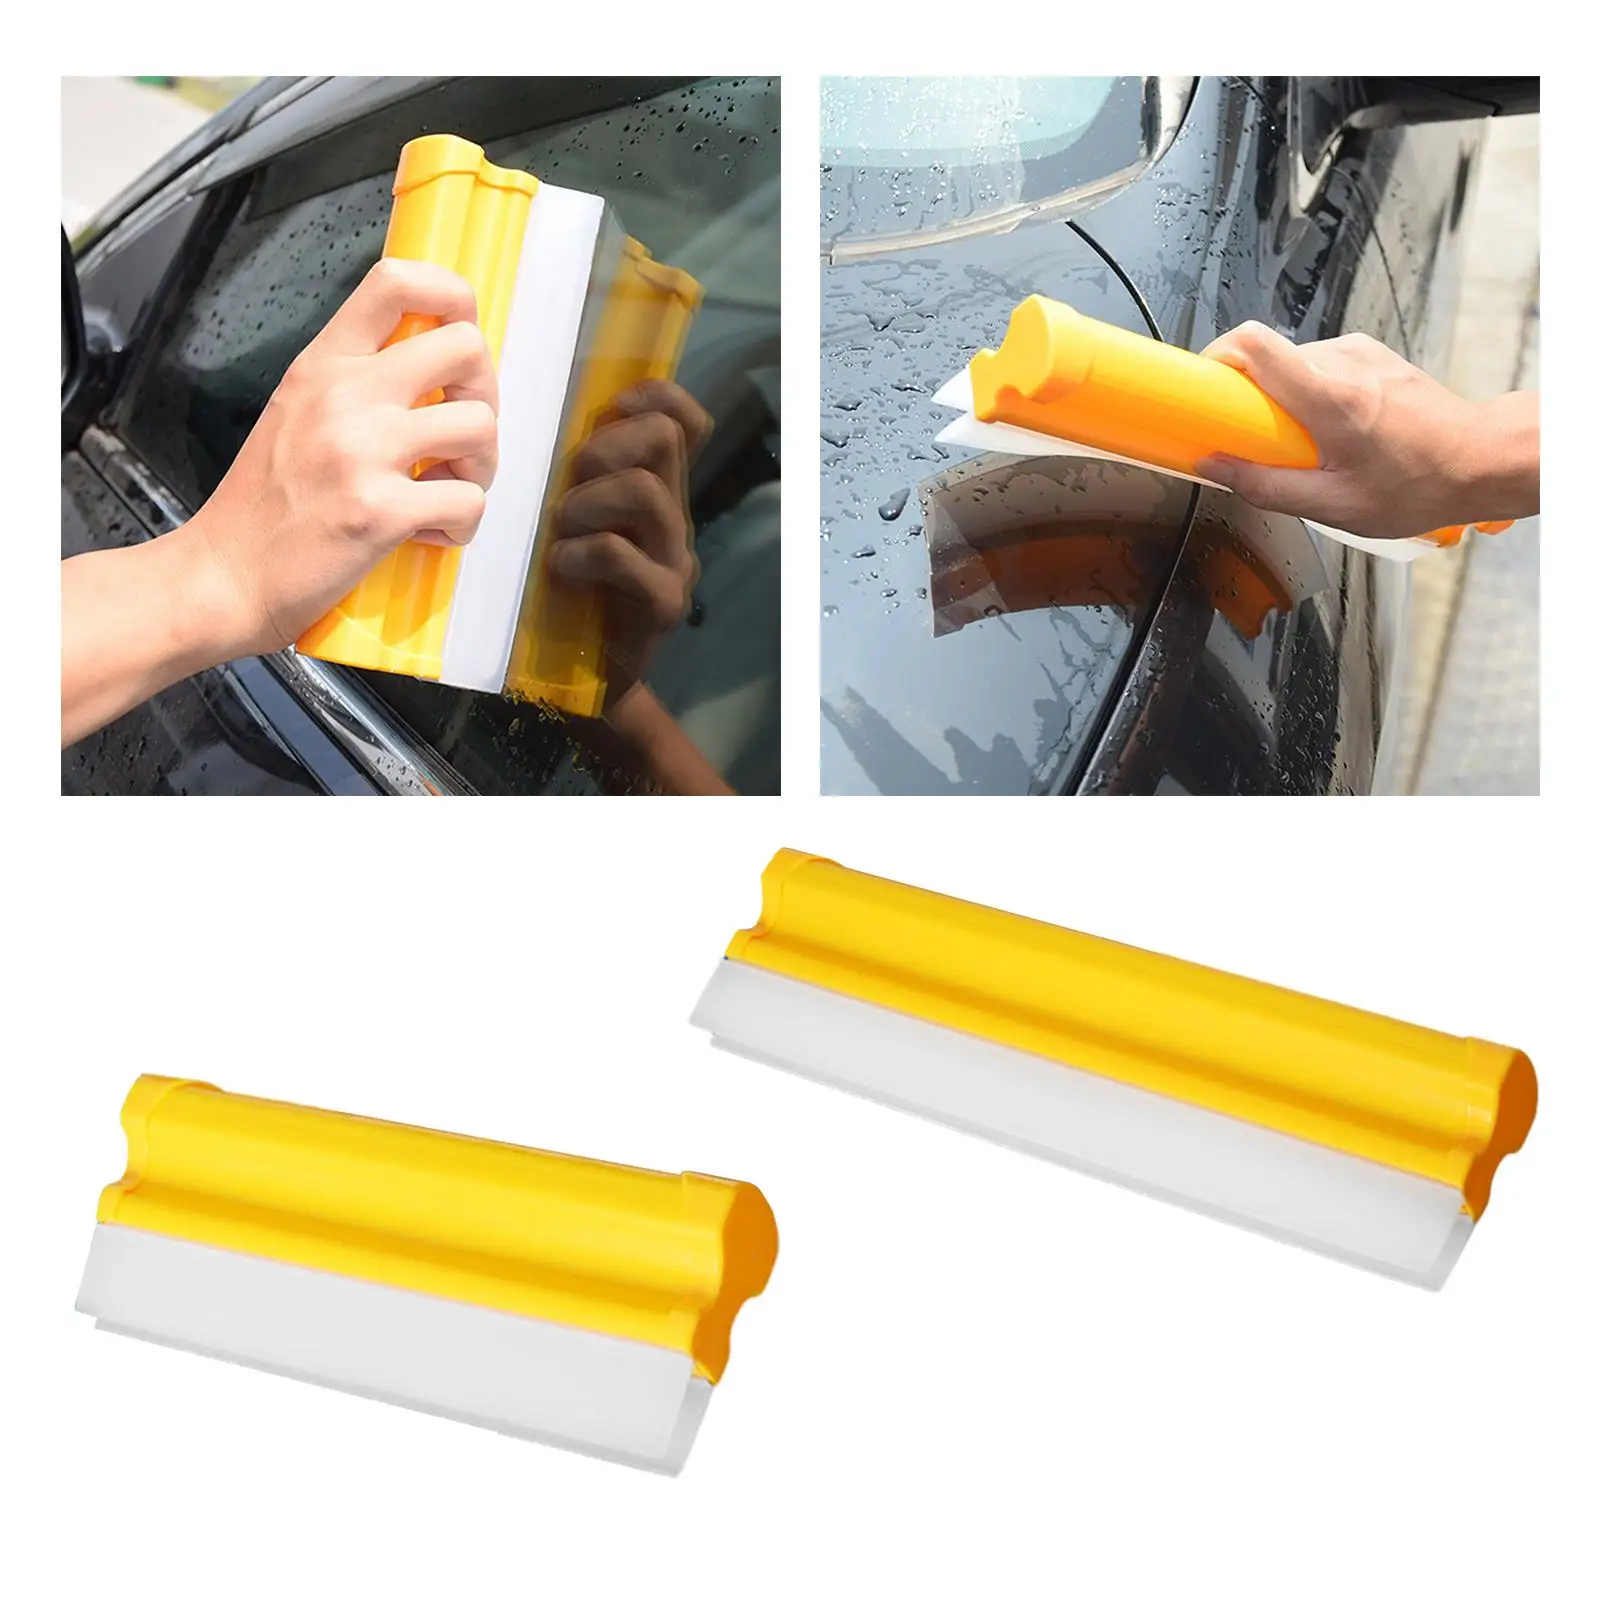 Window Scrubber Cleaning Tool Multifunction Handheld Silicone Wiper Board for Shower Doors Car Window Mirror Glass Fogged Mirror